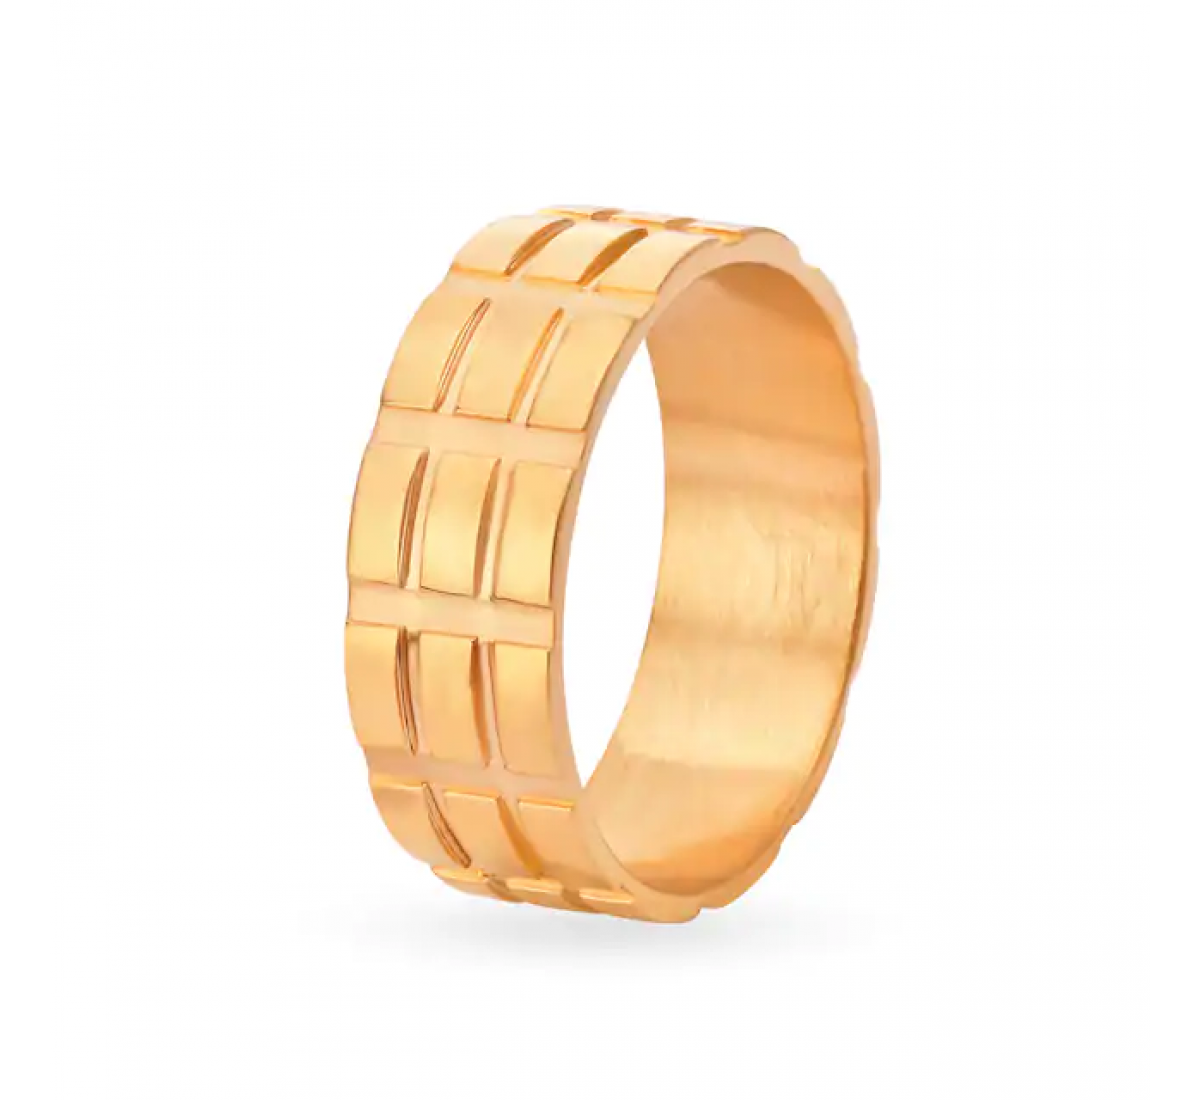 24k Gold Color Finger Rings For Women Multi Lines Heart Ring Adjustable  Anillo Bague Femme Wedding Jewelry Accessories Bijoux